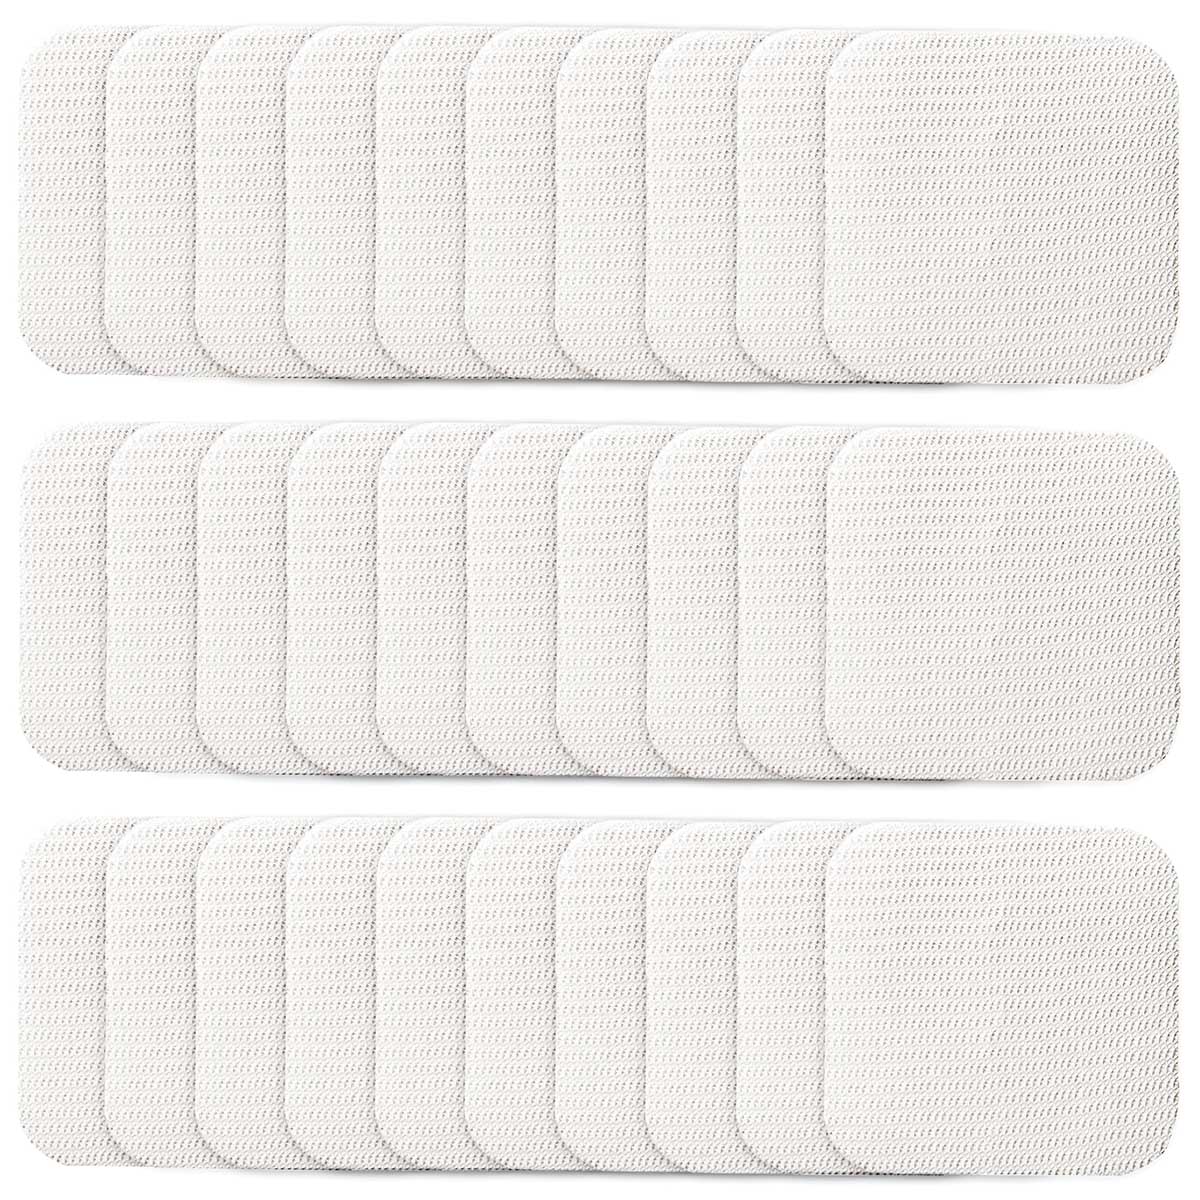 Replacement Adhesive Patches for Acupressure Spot Therapy Magnets, Premium  Round Bandage Pad Refills 